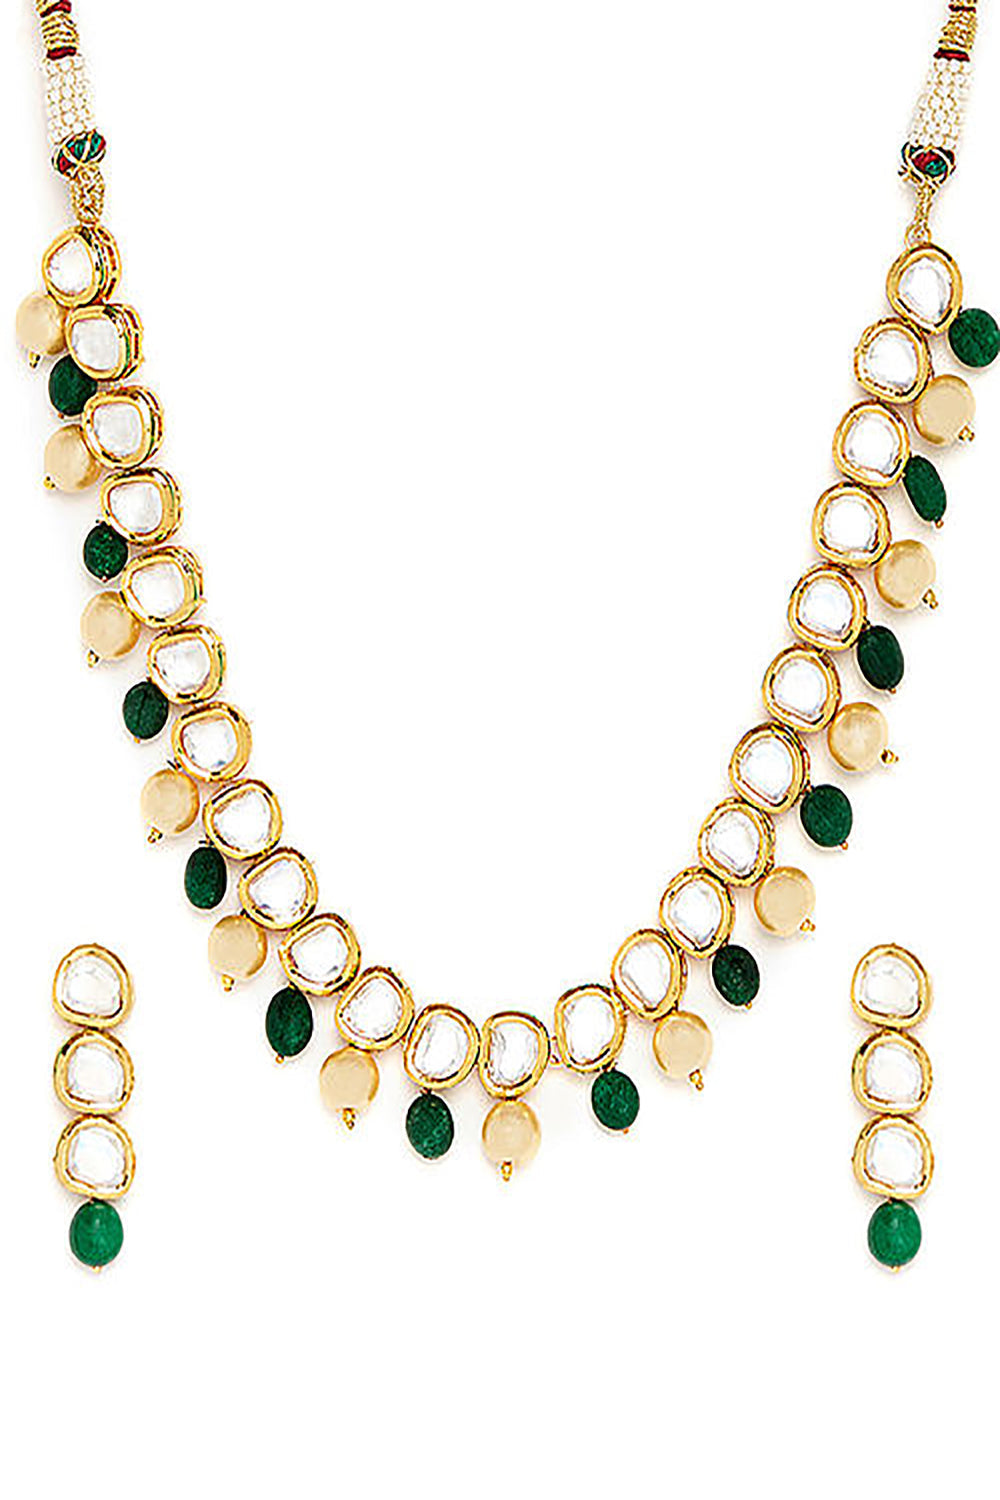 Shop Ayleen Kundan White & Green Gold Necklace and Earrings Set at best offer at our  Store - One Minute Saree